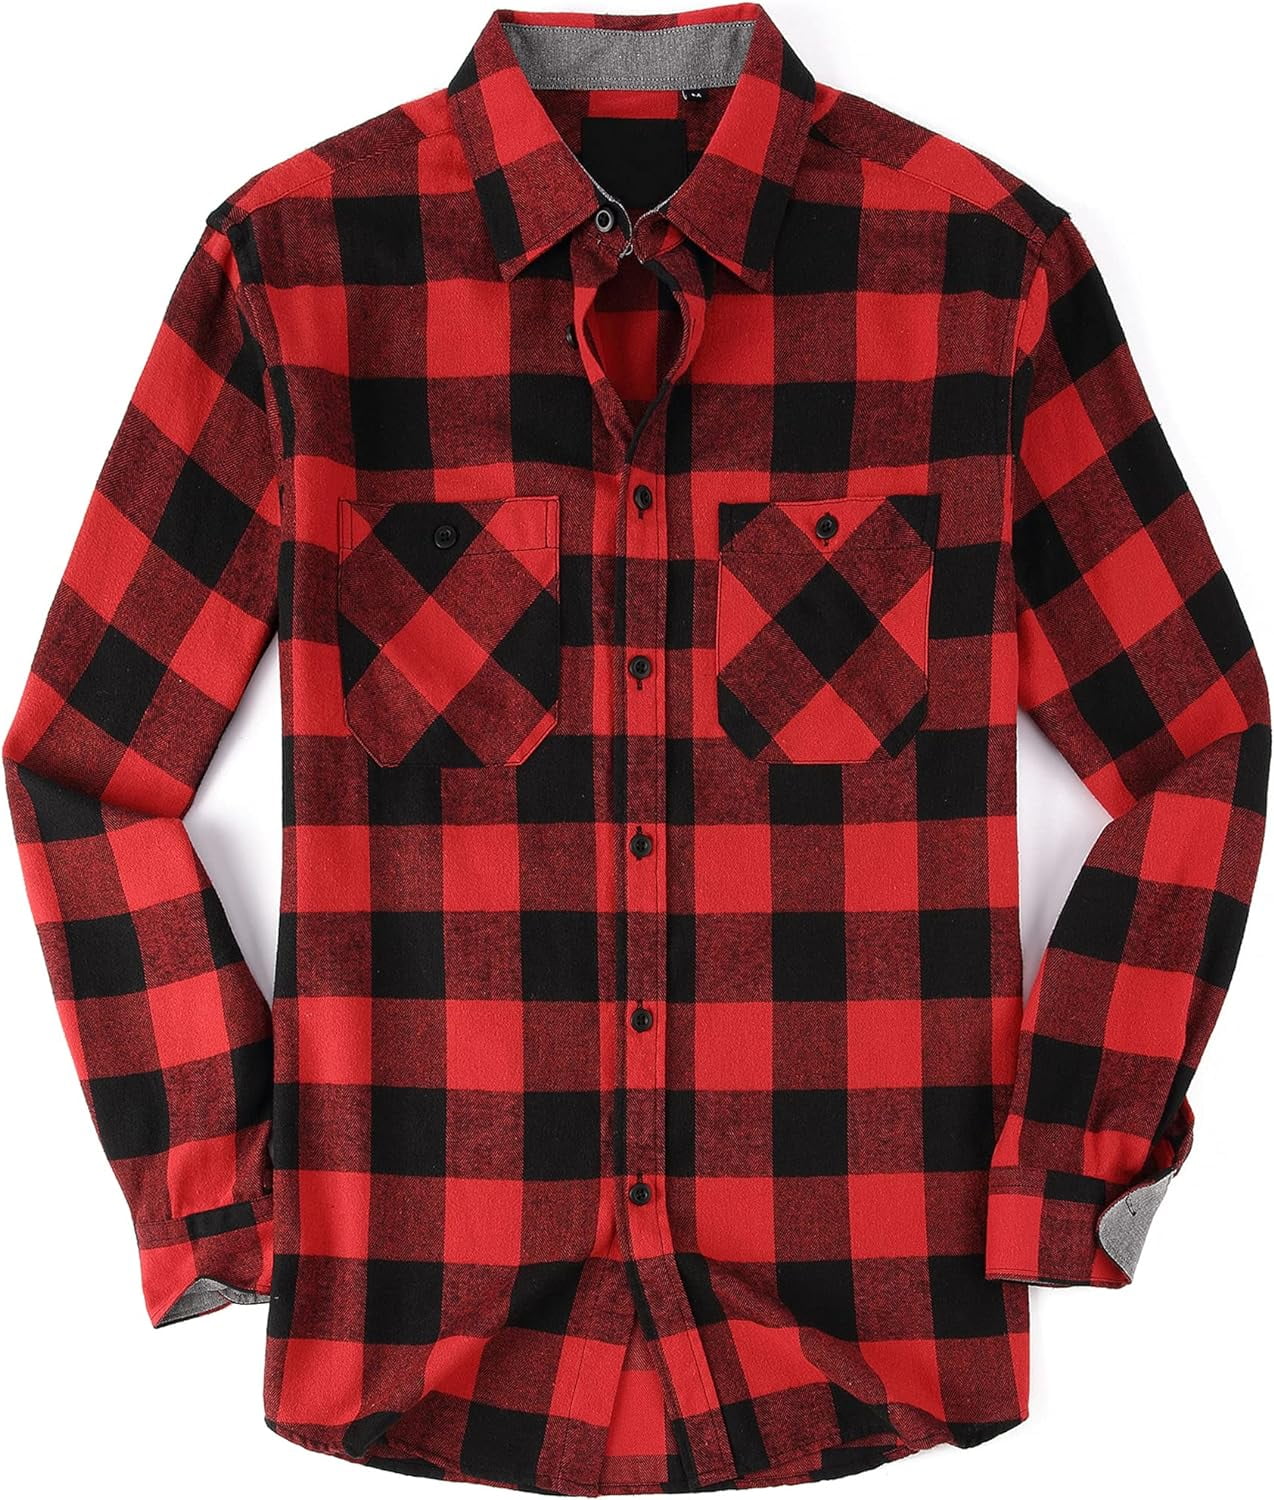 WARHORSEE Flannel Shirt for Men Long Sleeve Regular Fit Button Down ...